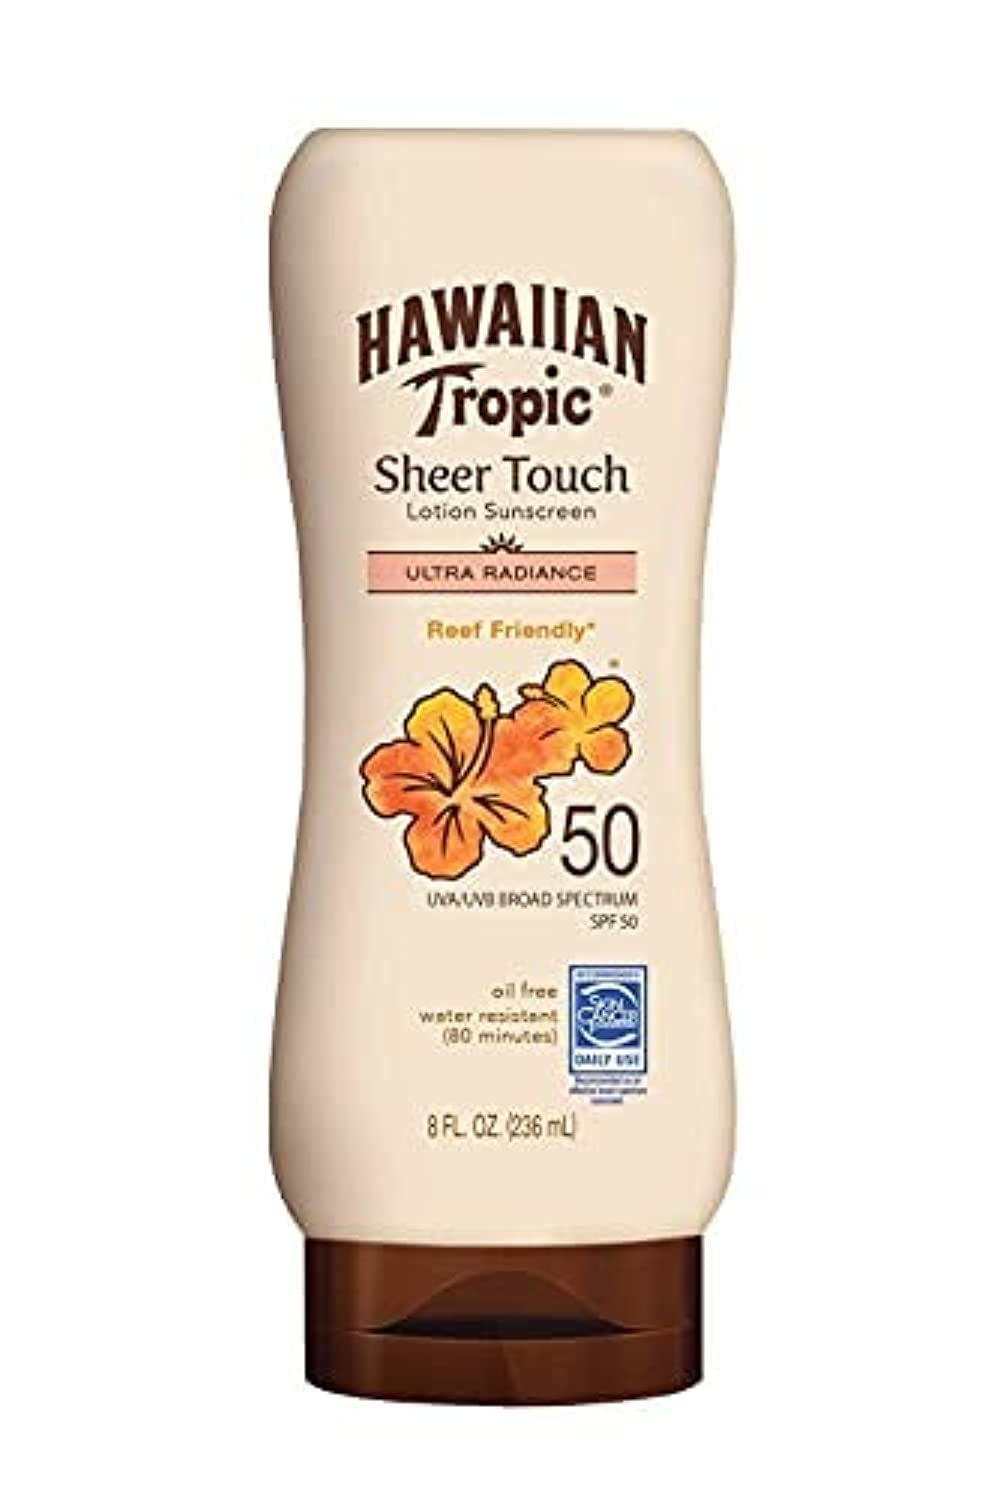 "Radiant Protection: Hawaiian Tropic Sheer Touch Ultra Radiance Lotion Sunscreen SPF 50 Twin Pack"